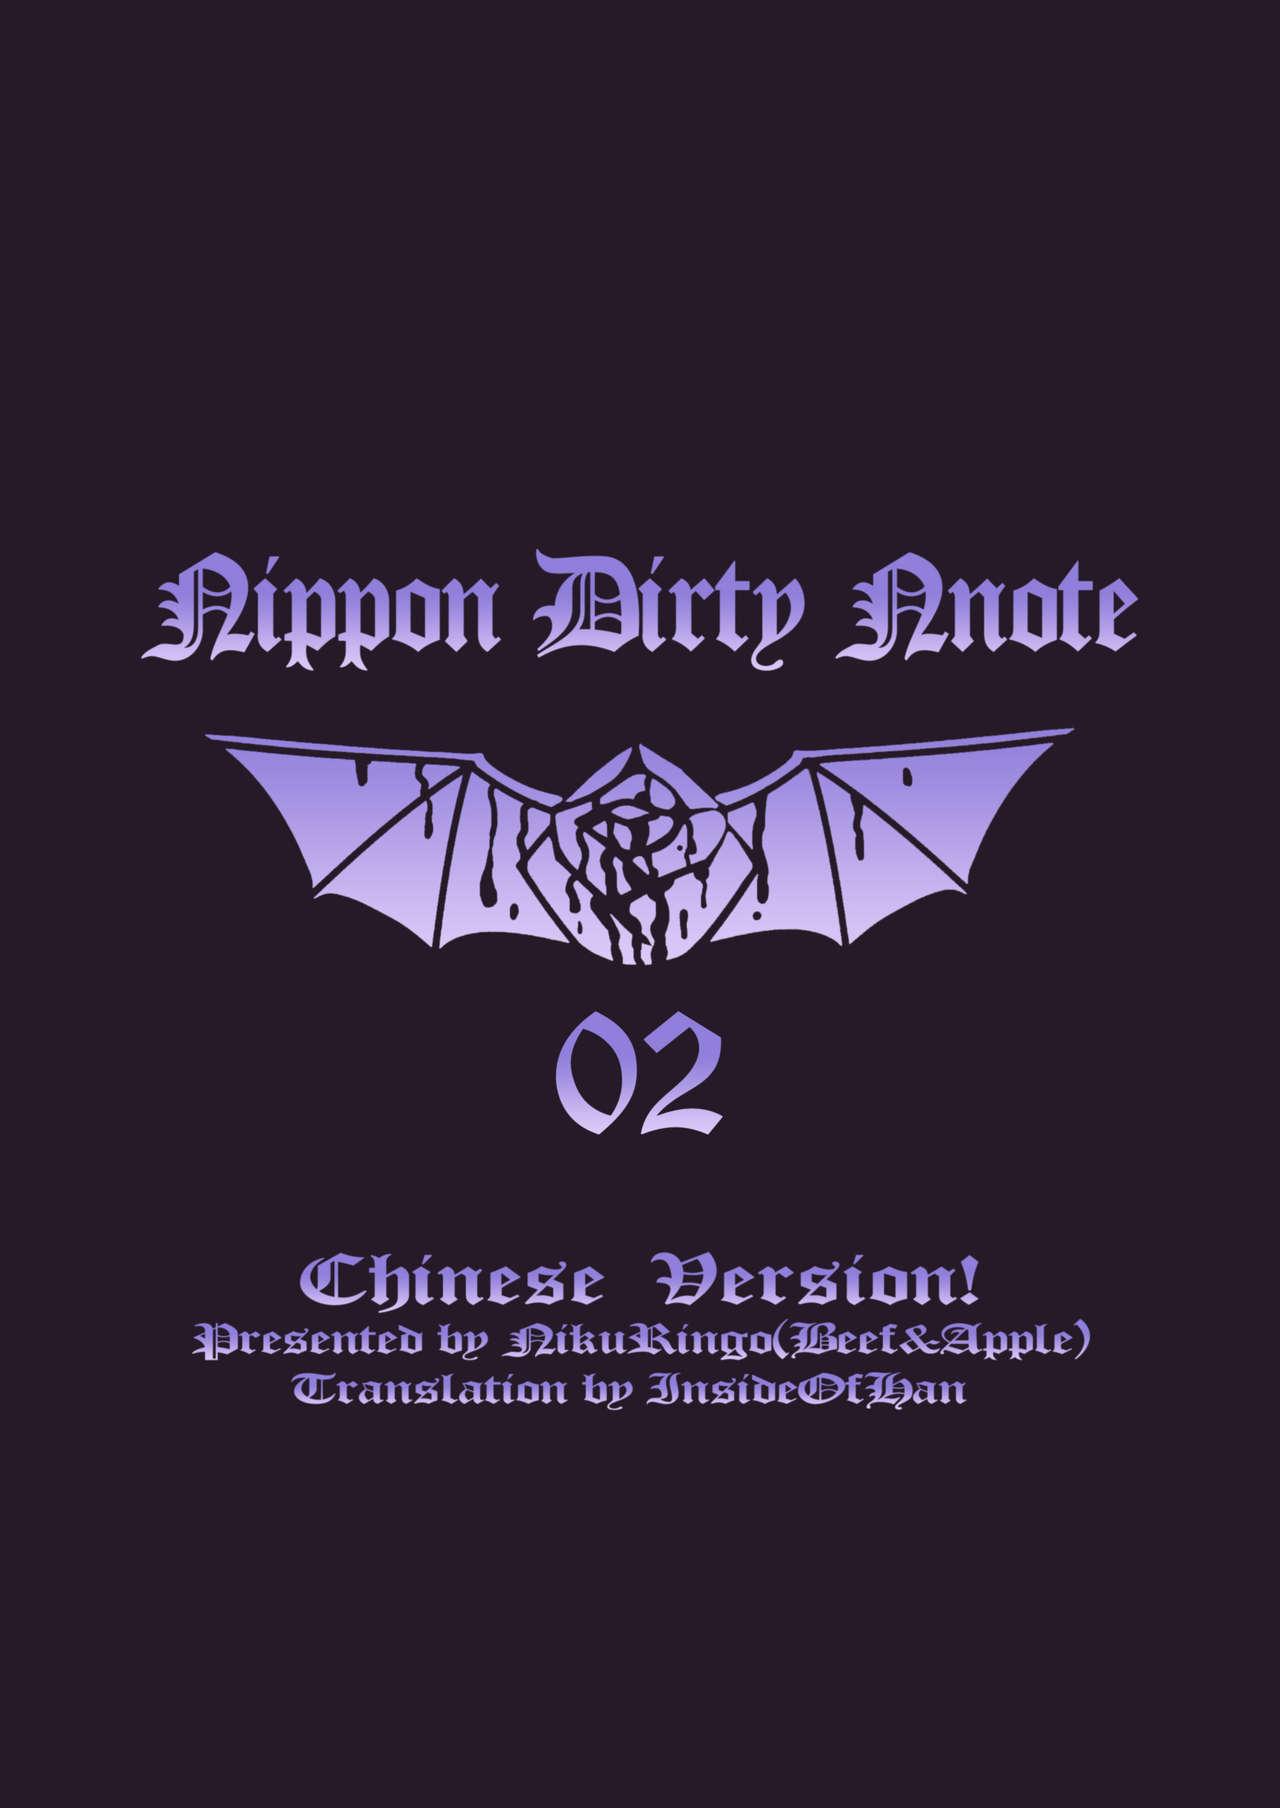 NIPPON DIRTY NOTE 02 34